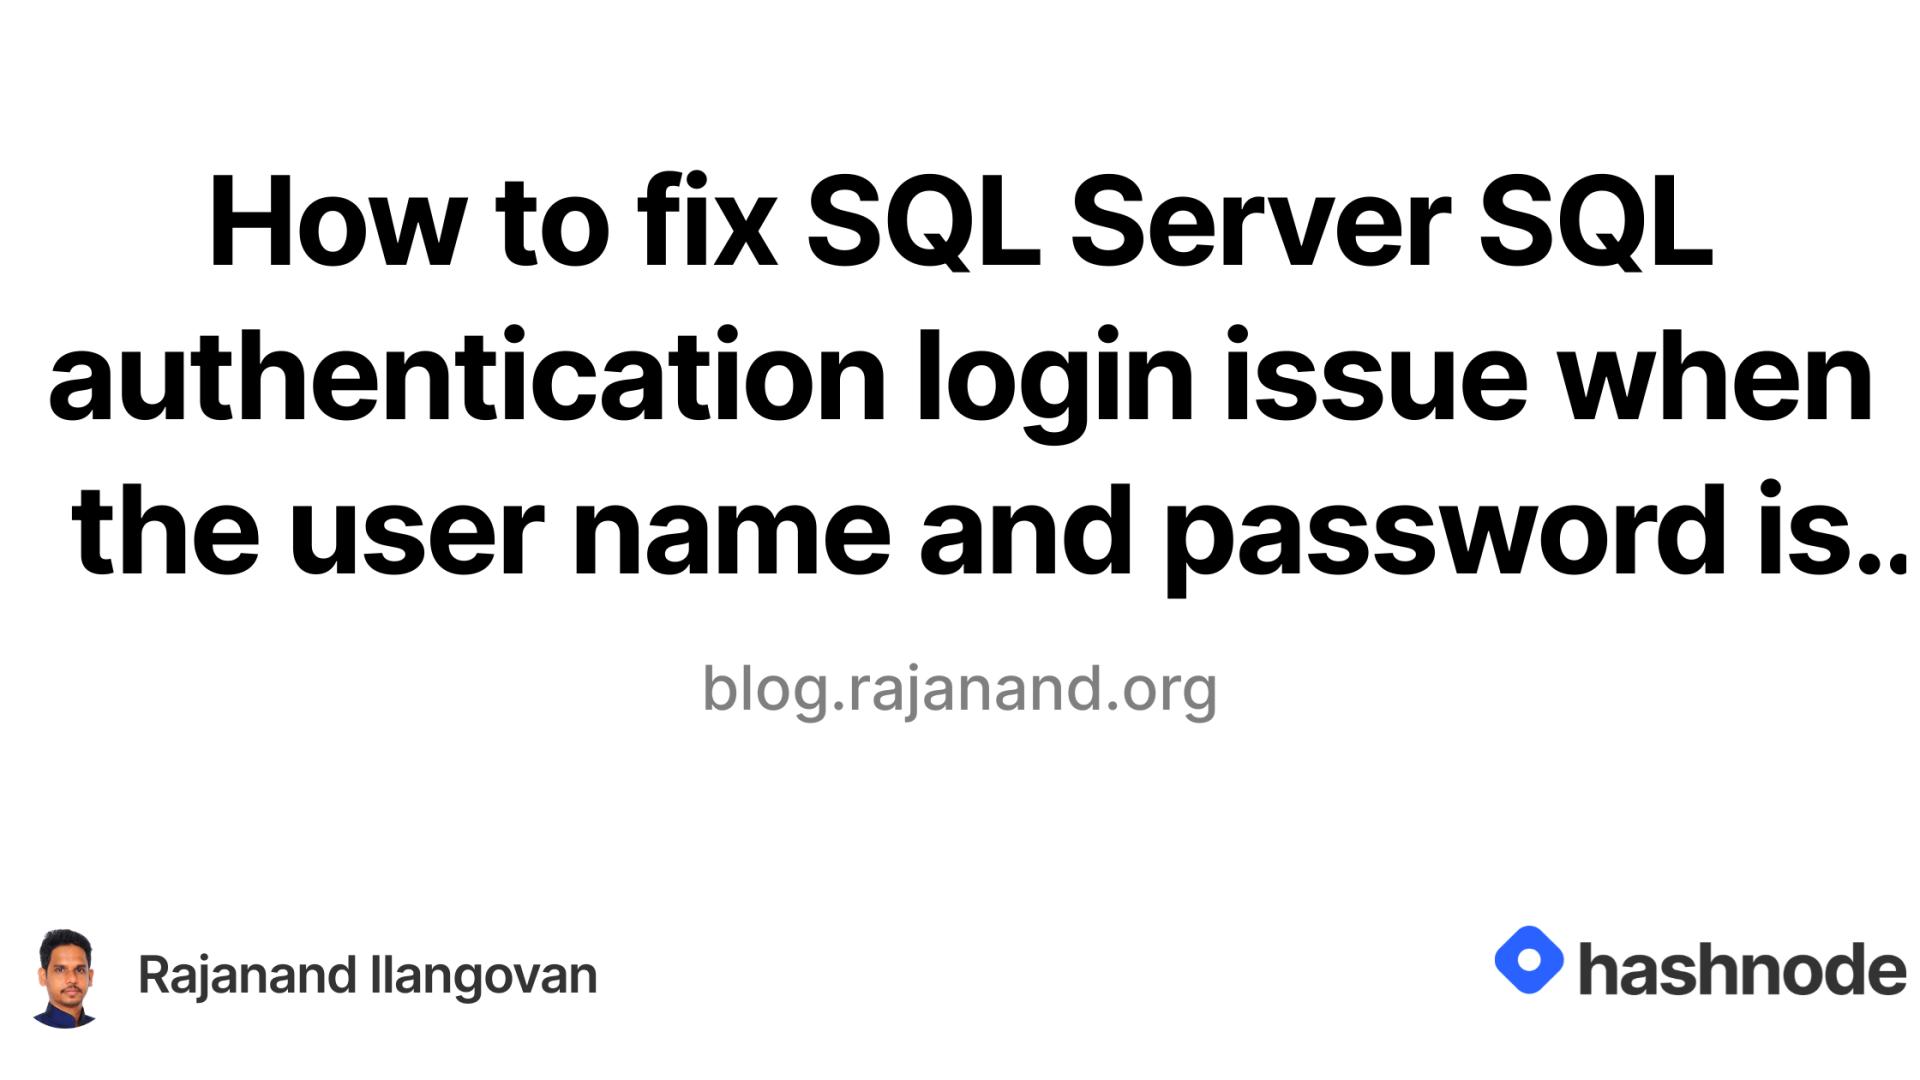 How to fix SQL Server SQL authentication login issue when the user name and password is correct?